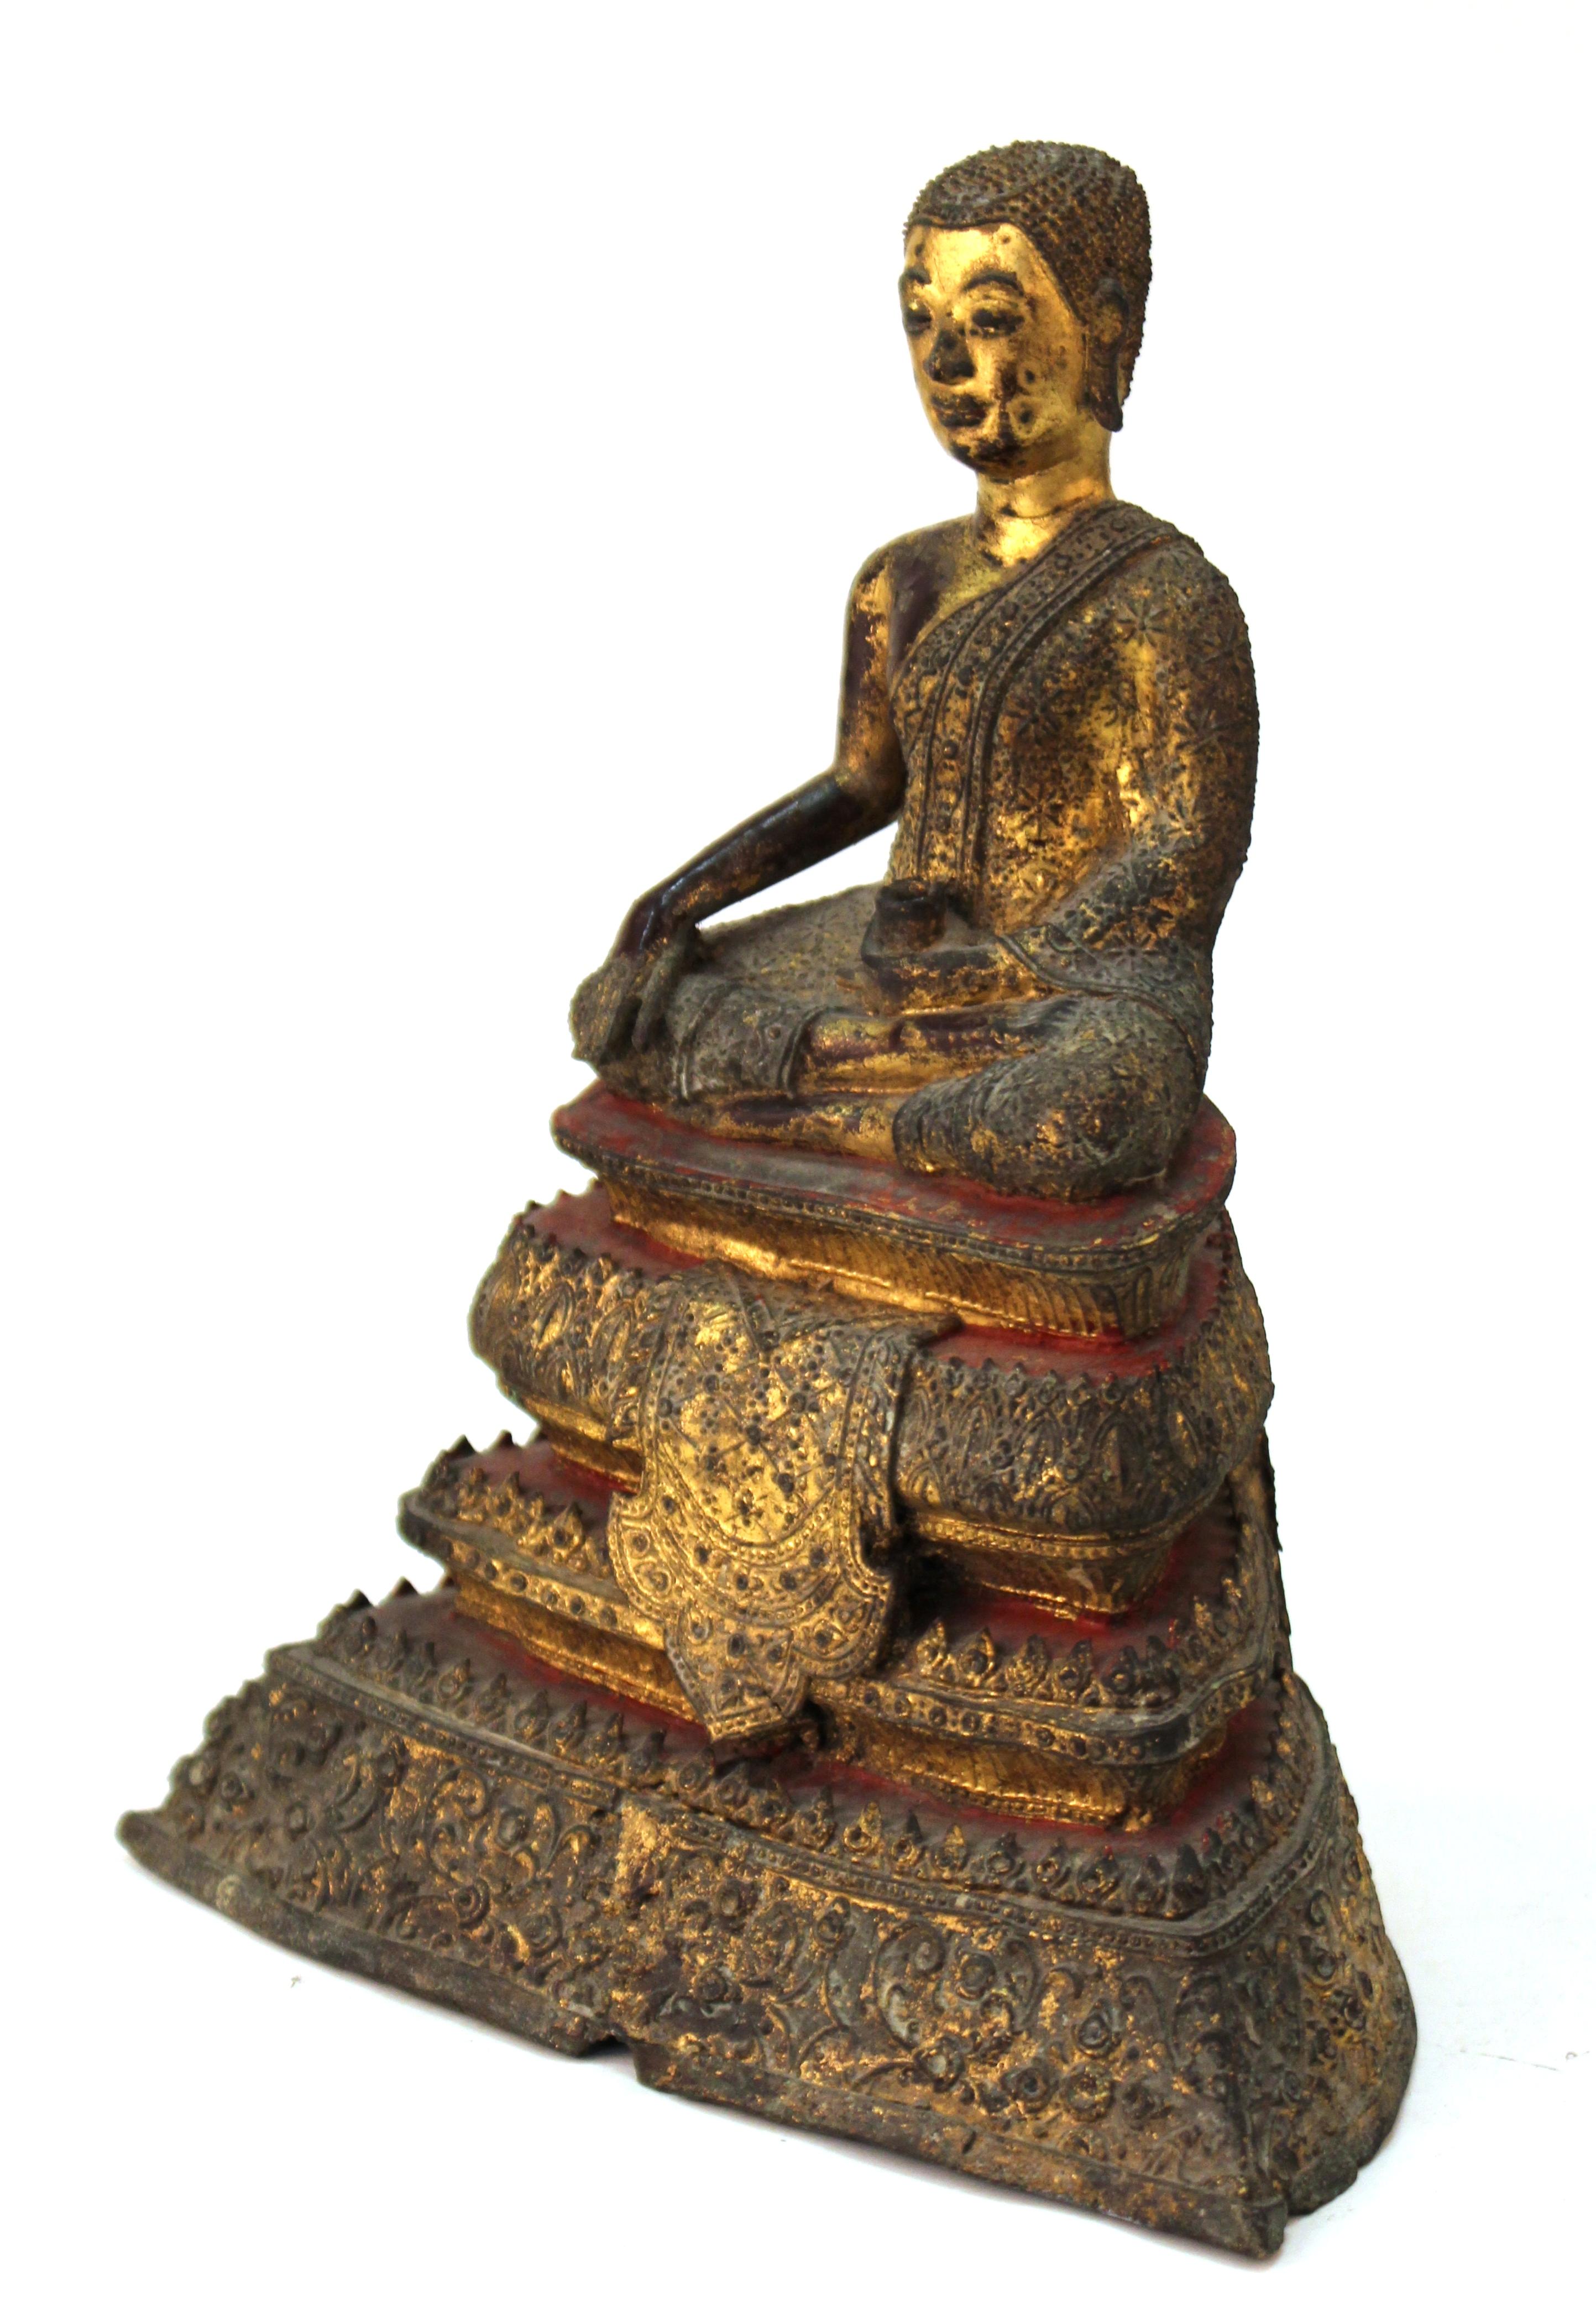 Thai Rattanakosin period cast gilt bronze Buddha from the mid-19th century, seated on a multi-tiered throne base. The backside of the statue has rings to be used as attachments to secure it to a wall within a temple setting. The statue is in great